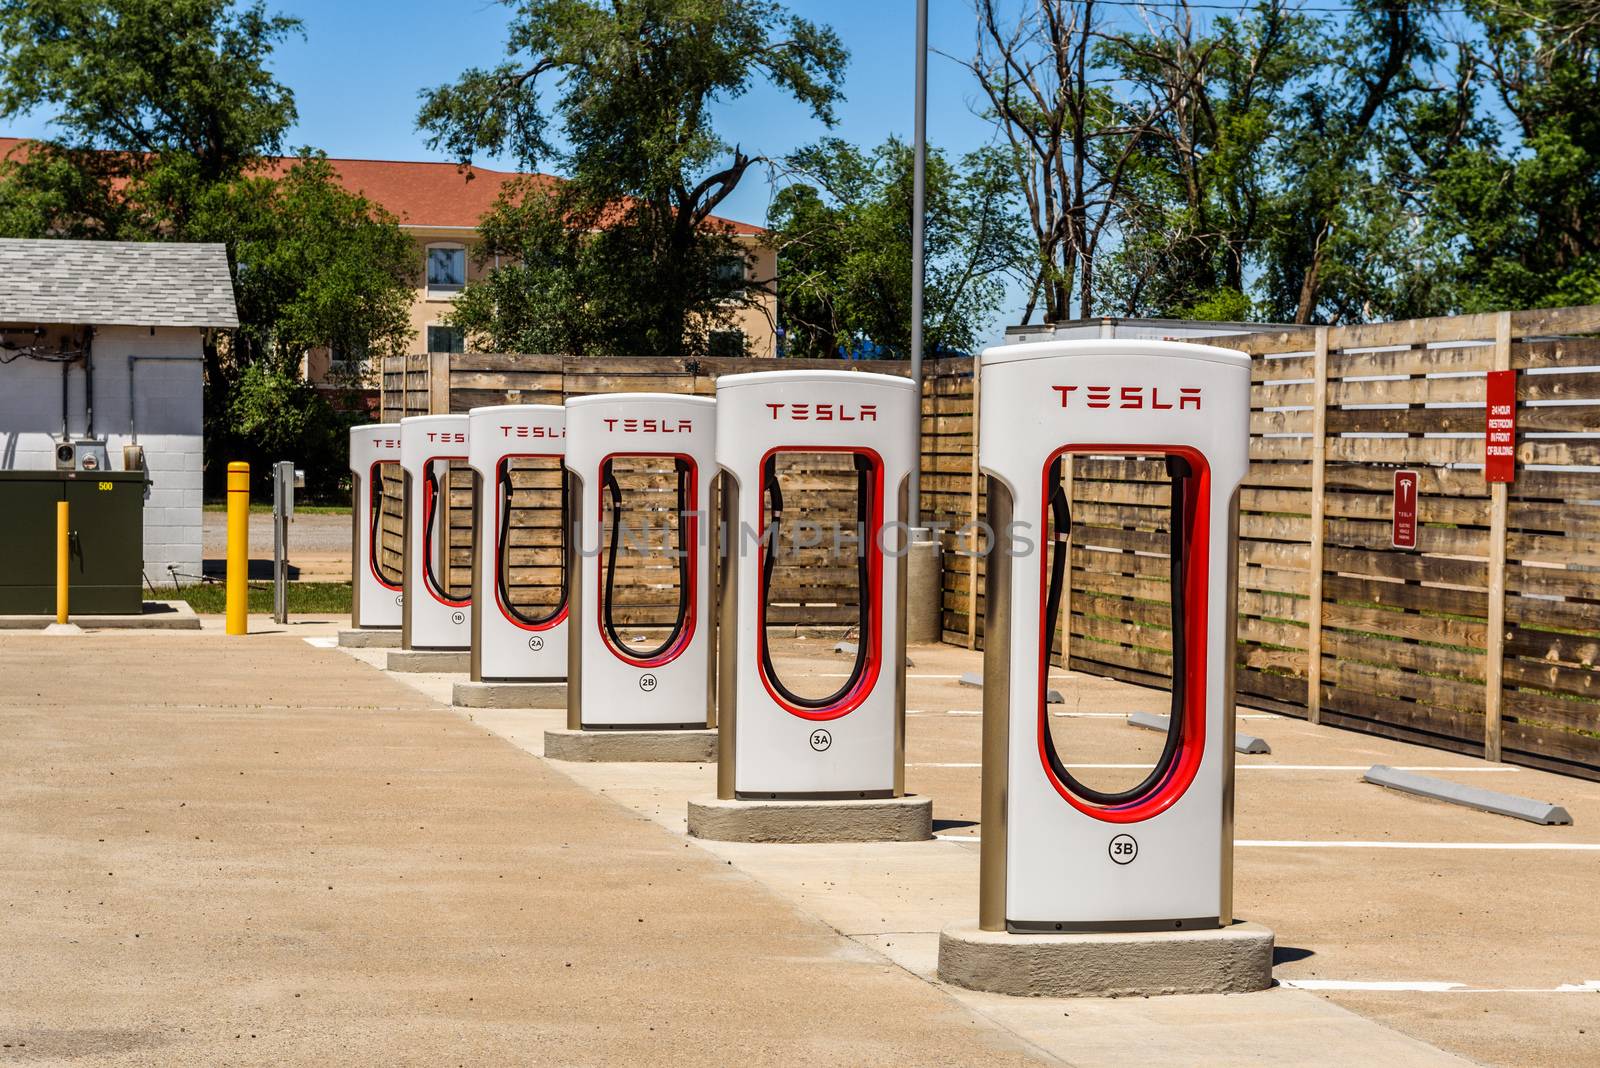 Kingman, Arizona, USA - May 12, 2016: Multiple Tesla chargers in Arizona. Tesla Supercharger is a 480-volt fast-charging station from Tesla Inc. for their all-electric cars.